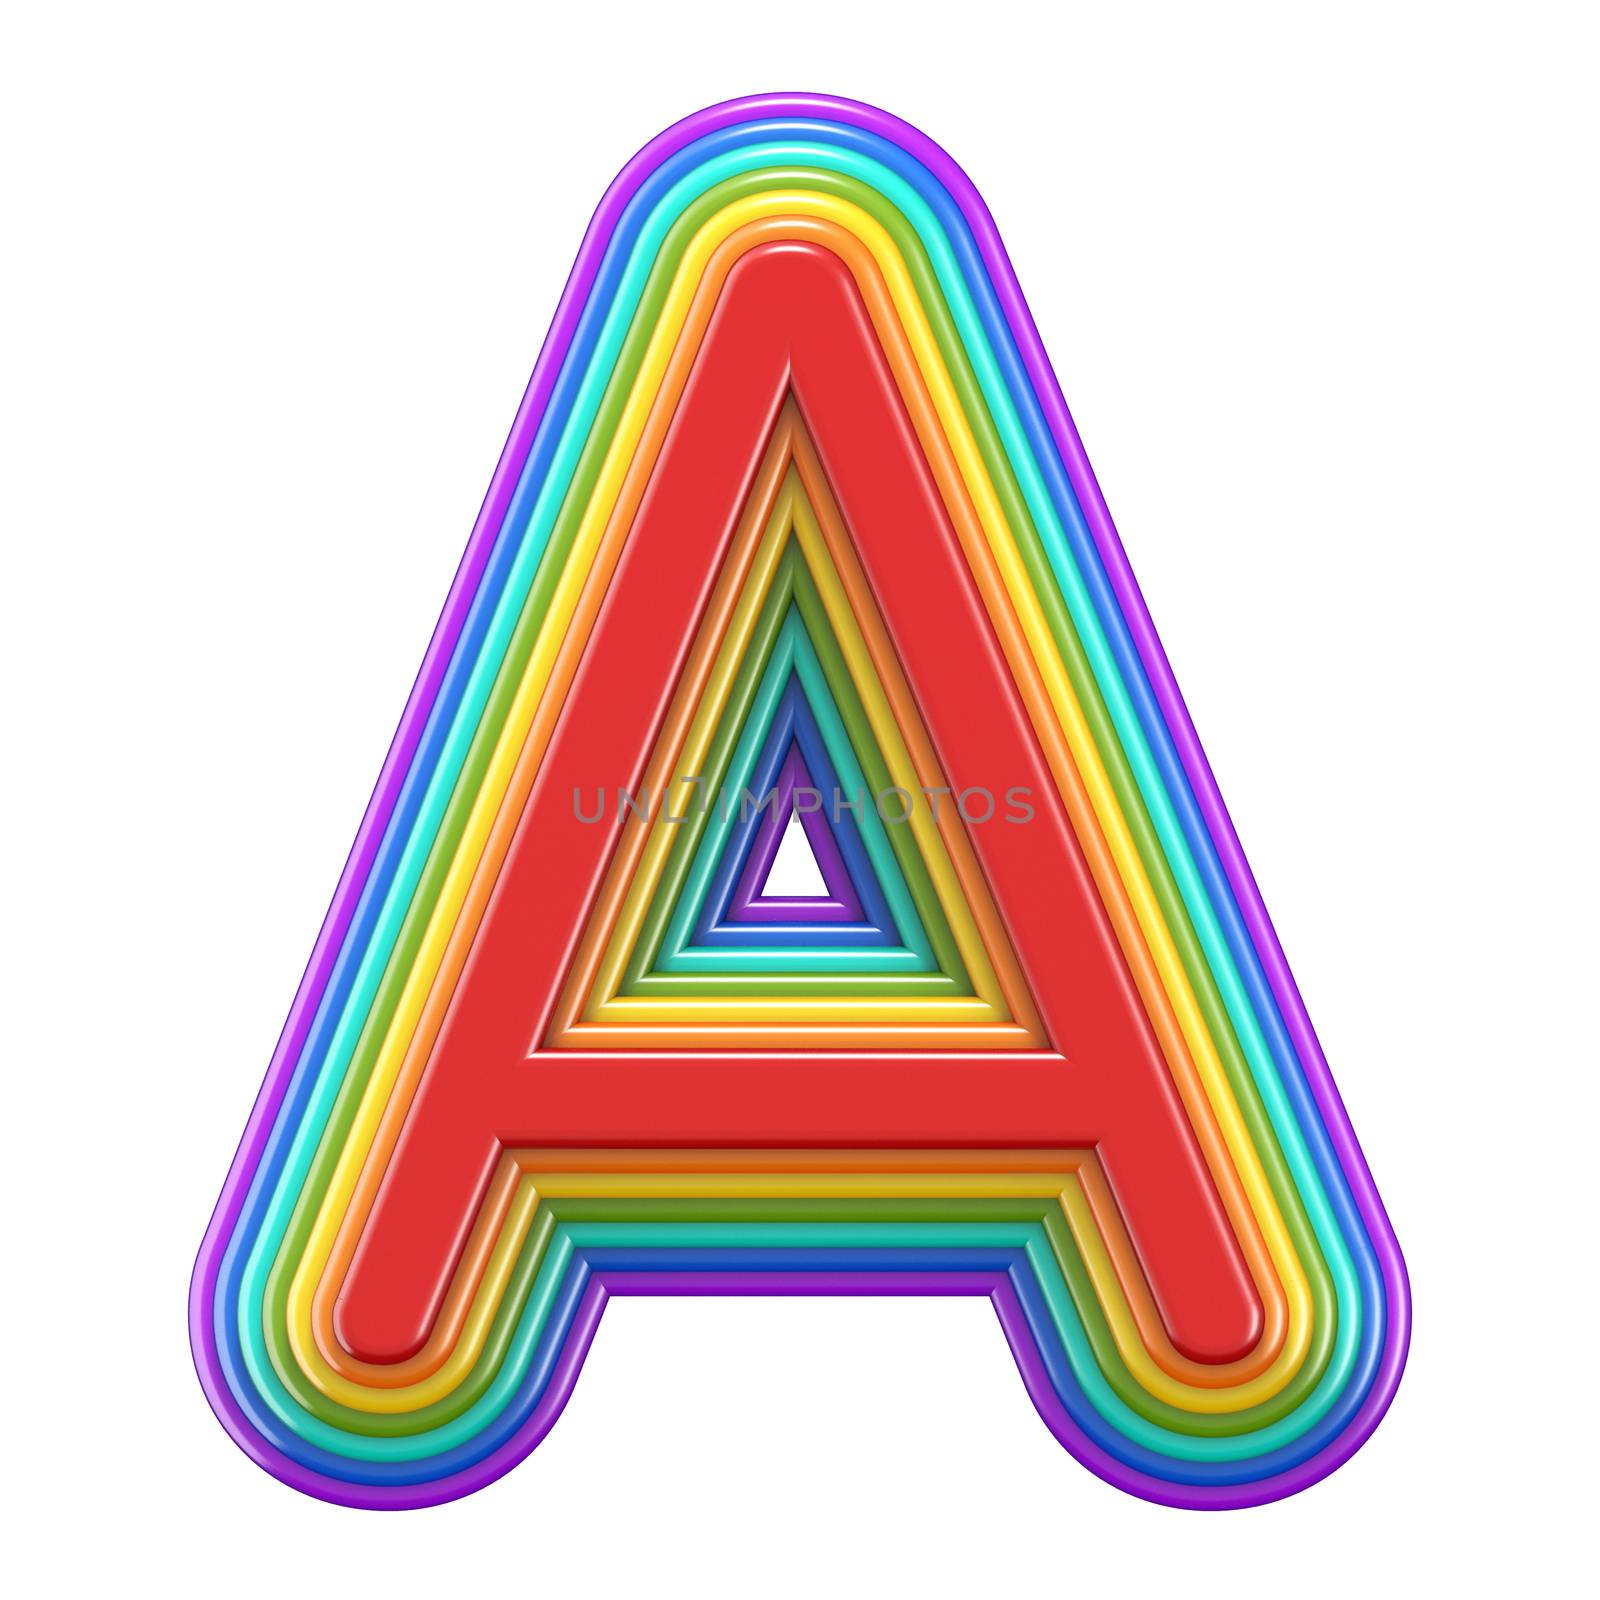 Concentric rainbow font letter A 3D rendering illustration isolated on white background